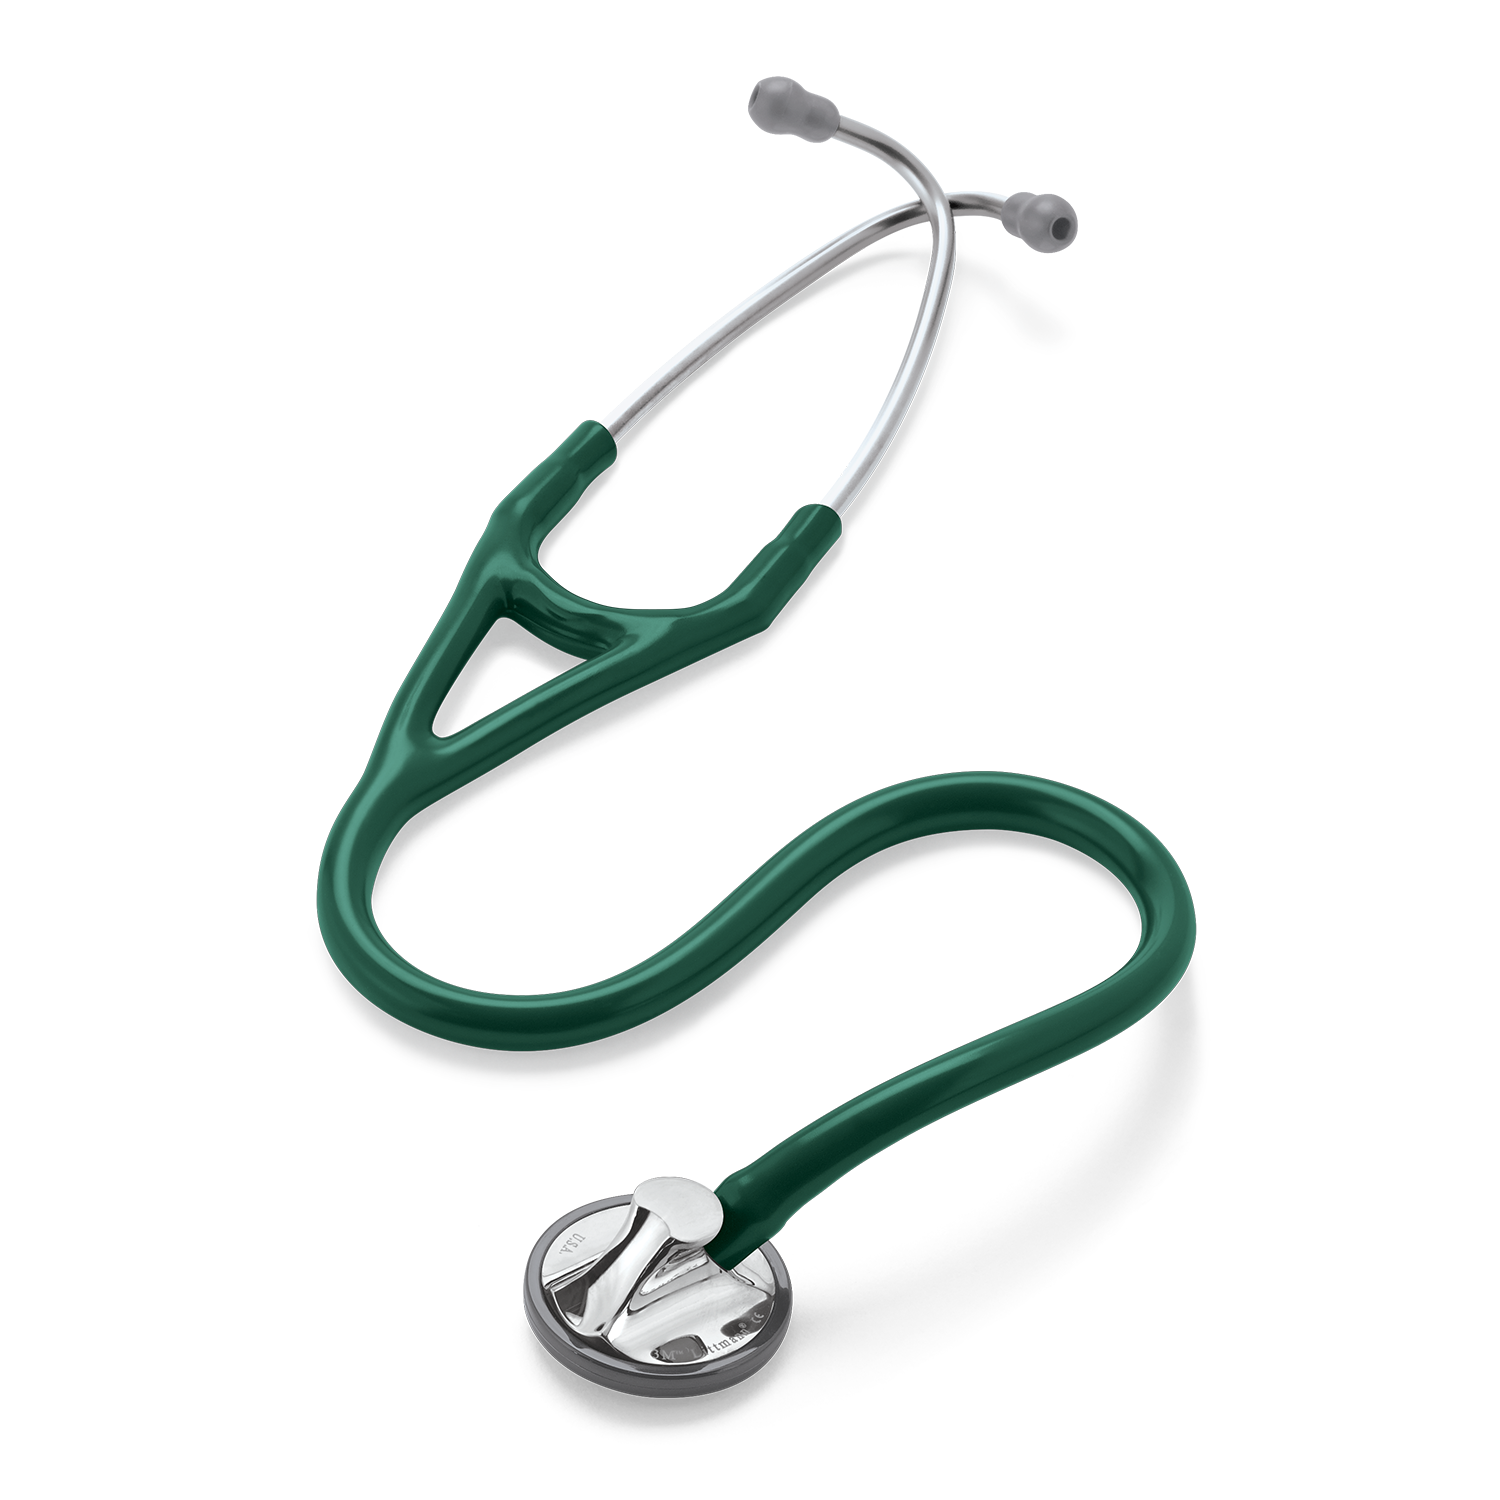 Finesse 2 Pressure Cardiology Stethoscope | Green (1)